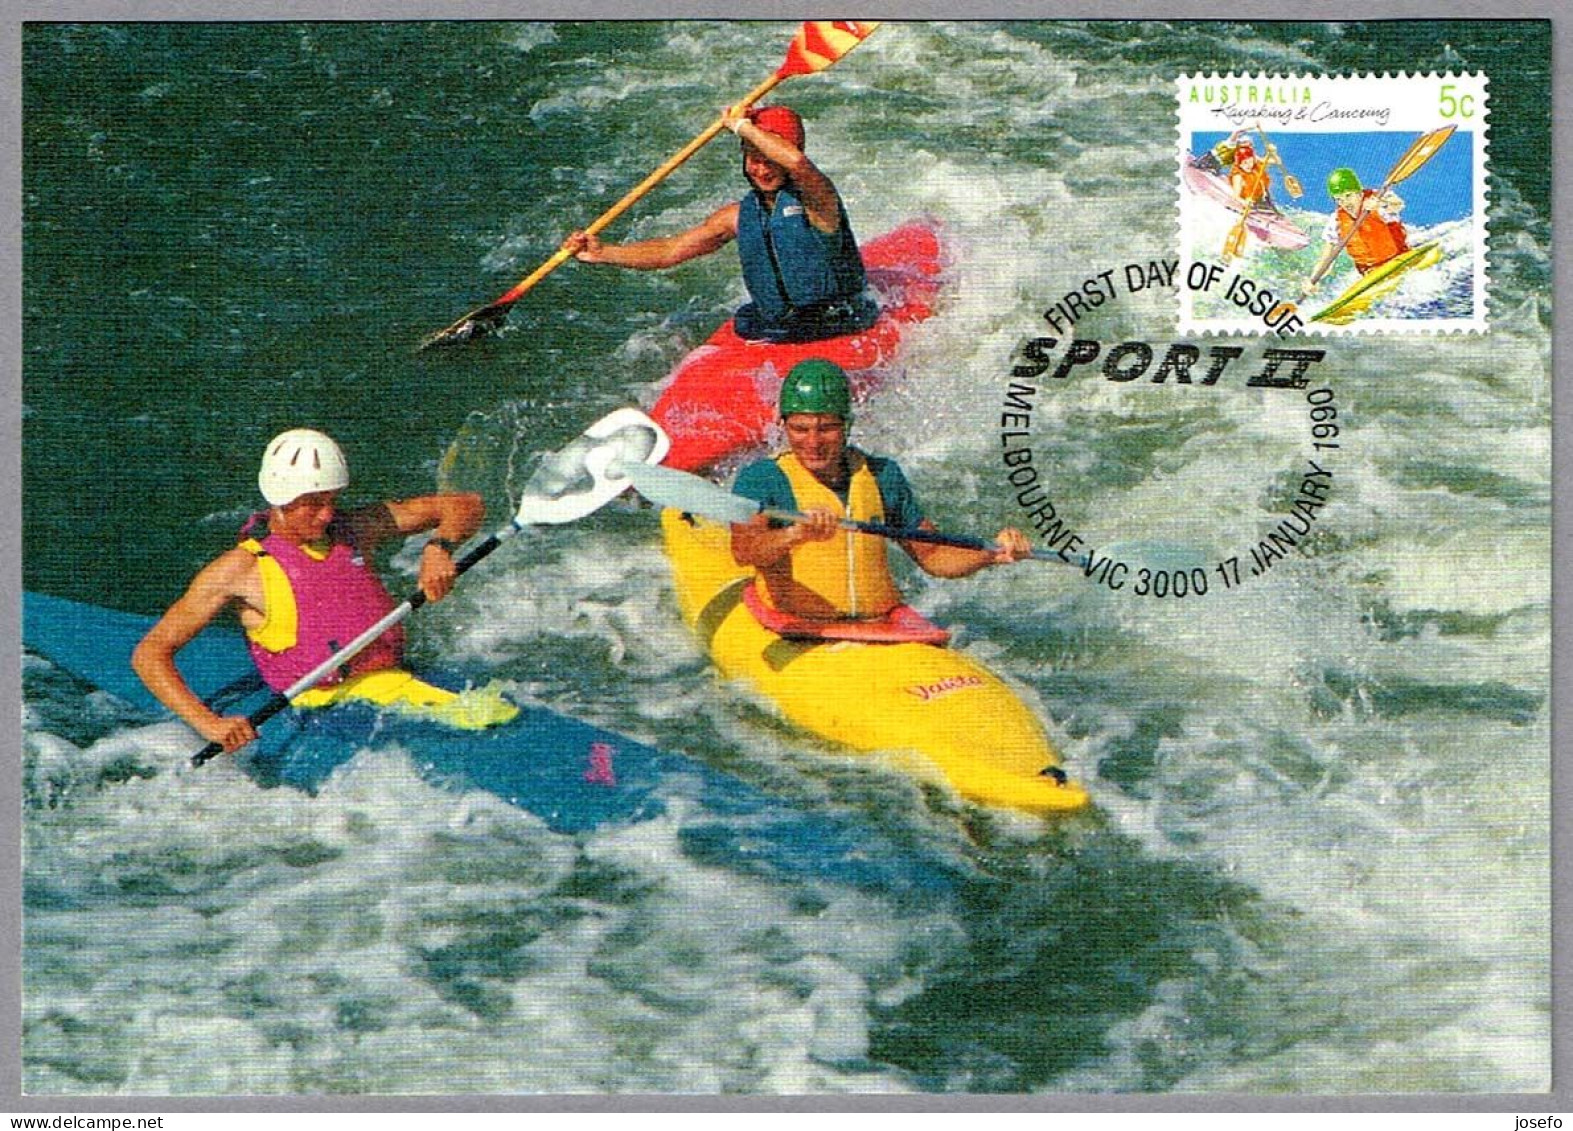 KAYAKING & CANOEING - REMO. Melbourne Vic 1990 - Canoa